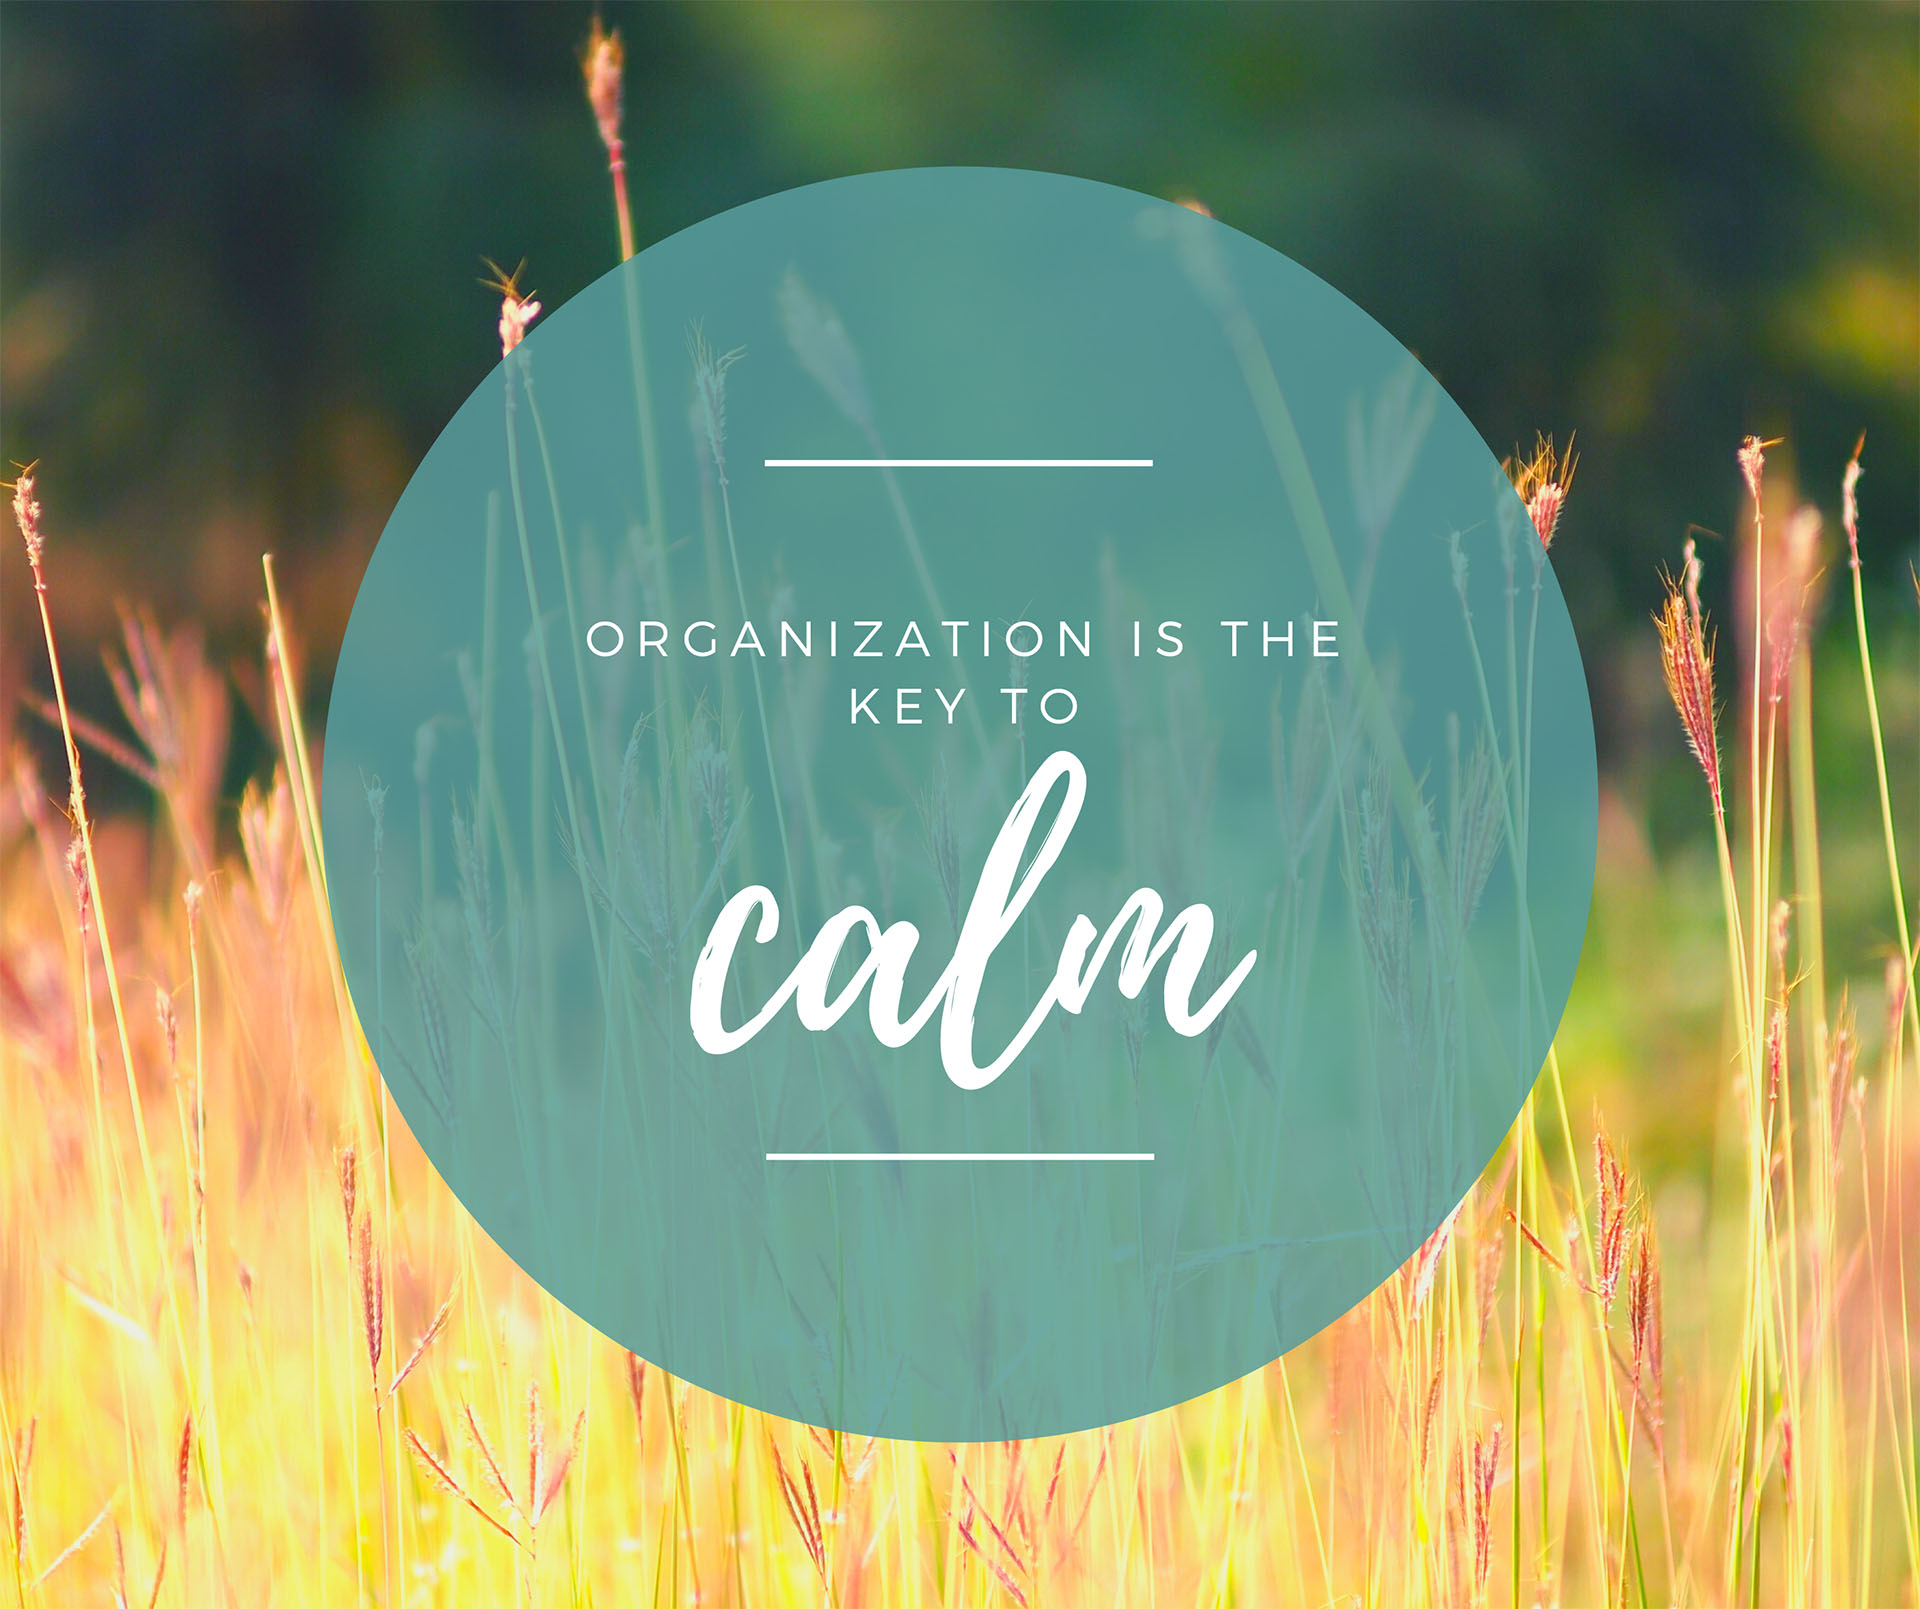 Organization is the key to calm